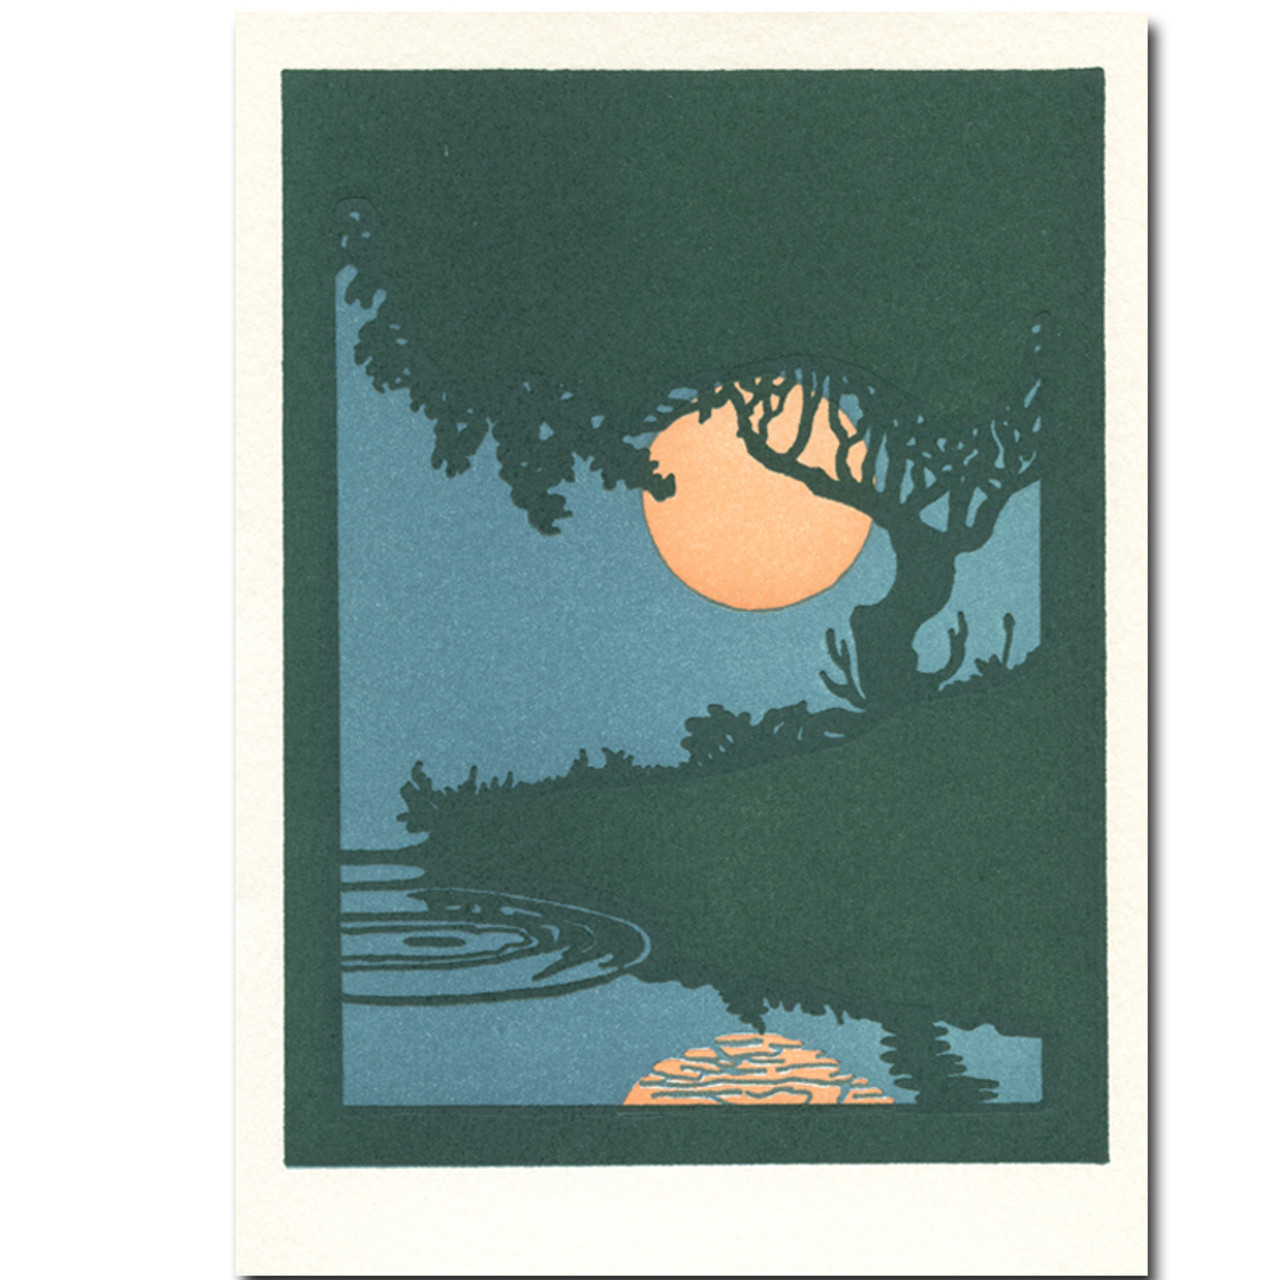 Summertime: Saturn Press letterpress card features a summer moon shining through the trees and reflecting in the river